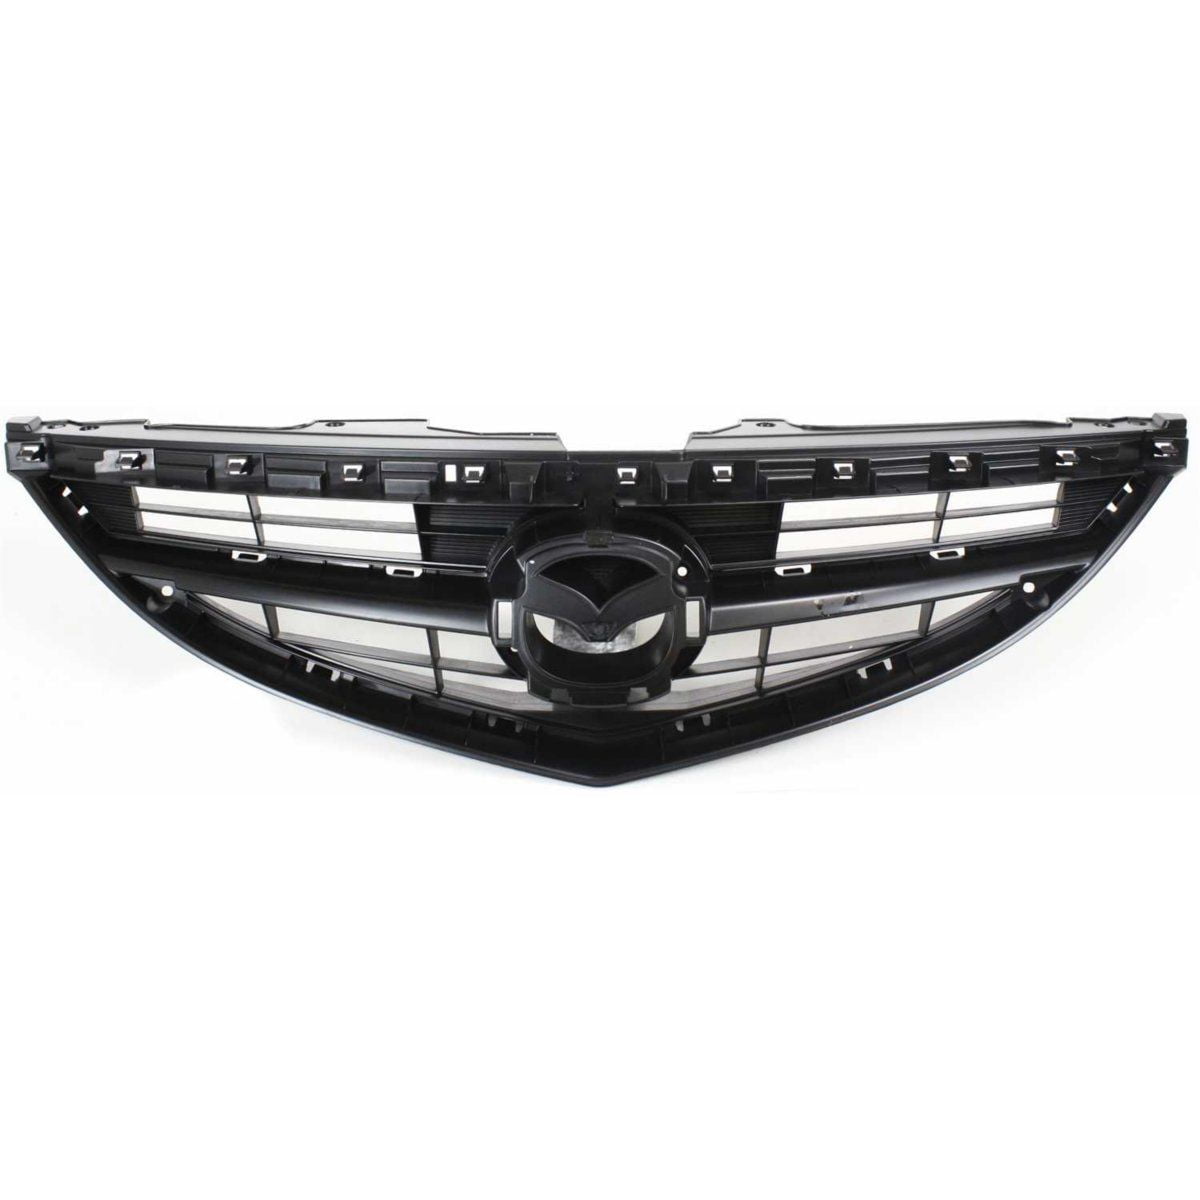 Grille Honeycomb for Mazda 6 GH Atenza 2008 - 2013 Front vent